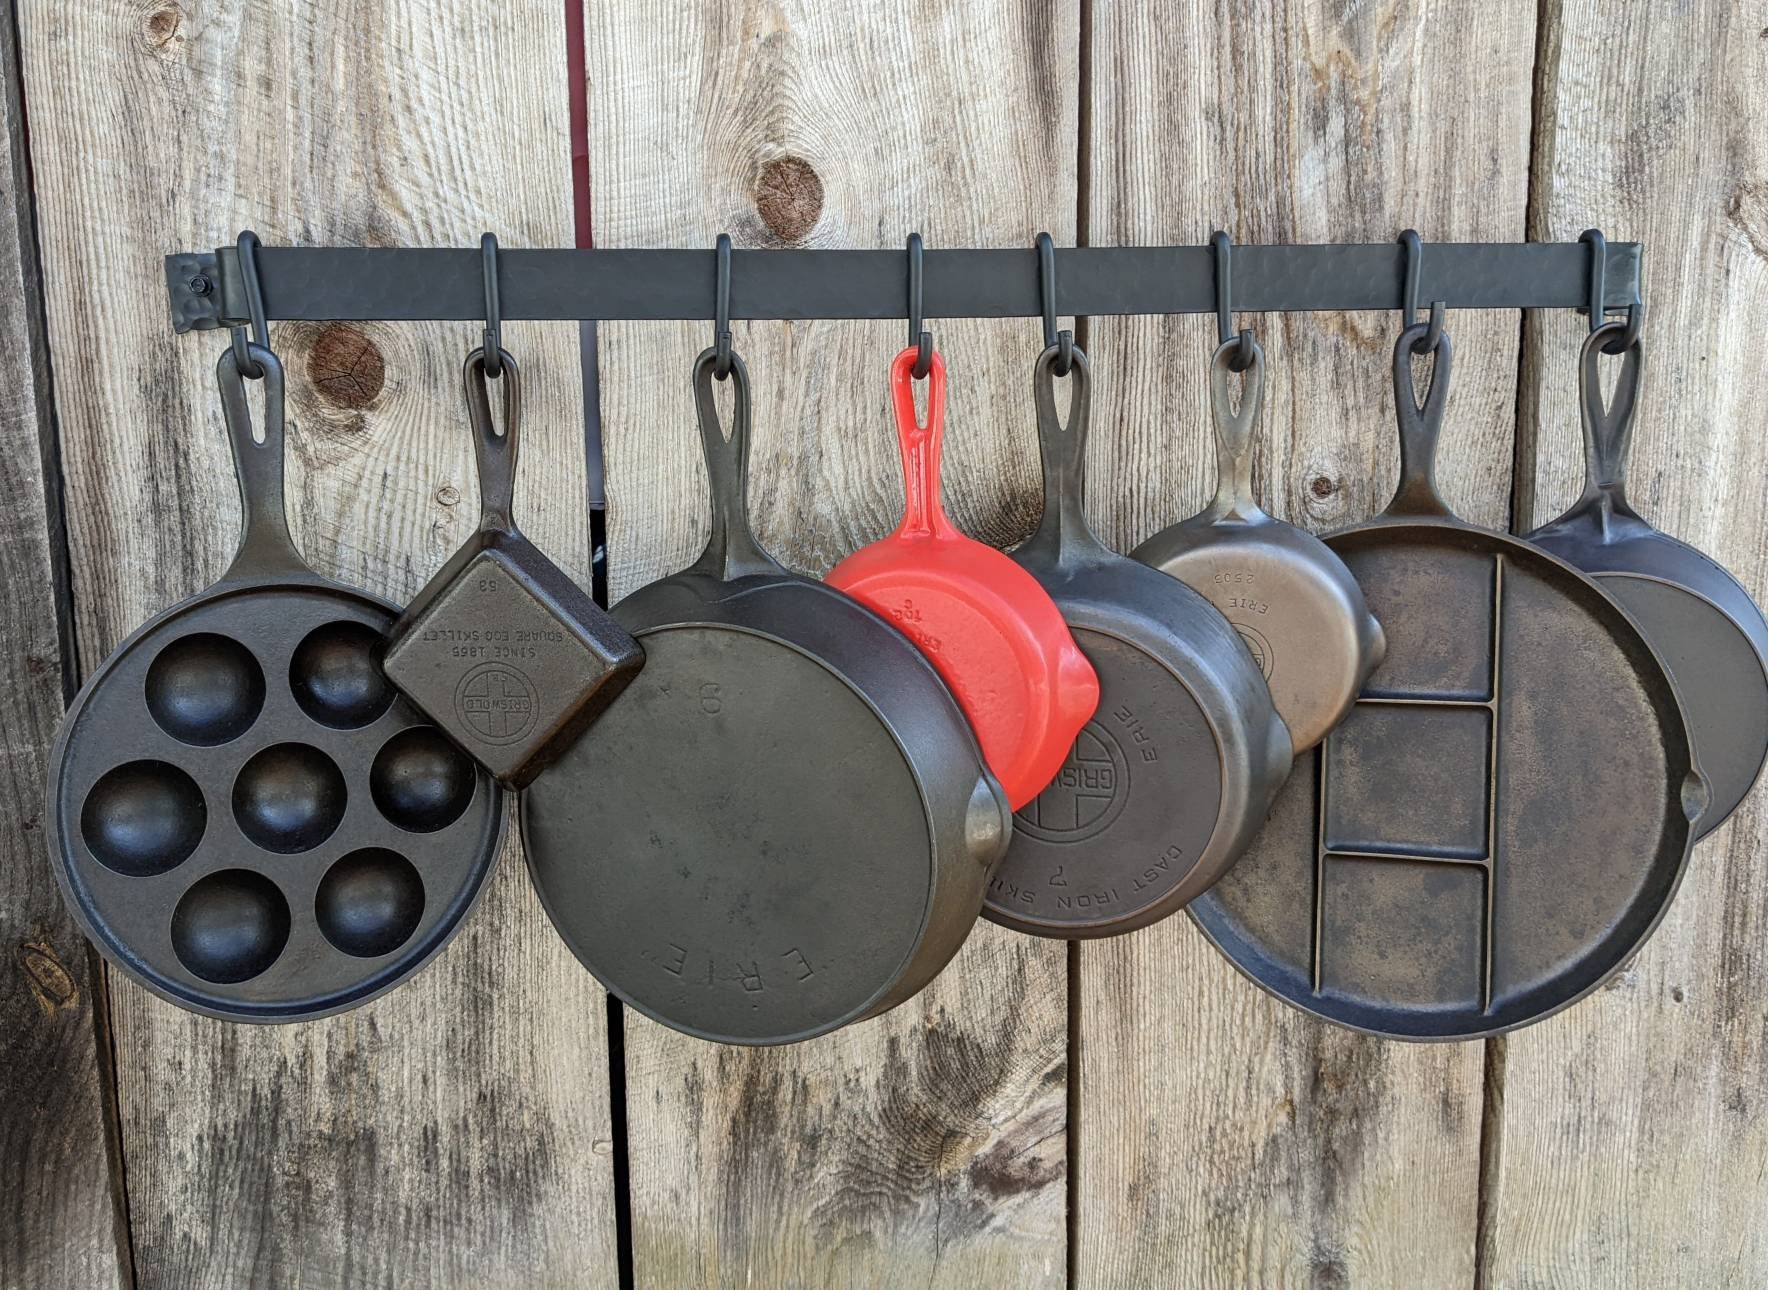 Made hanging racks for my Iron. Top row are Griswolds, middle is a Wapak  and a griddle. Bottom is all Griswold. : r/castiron